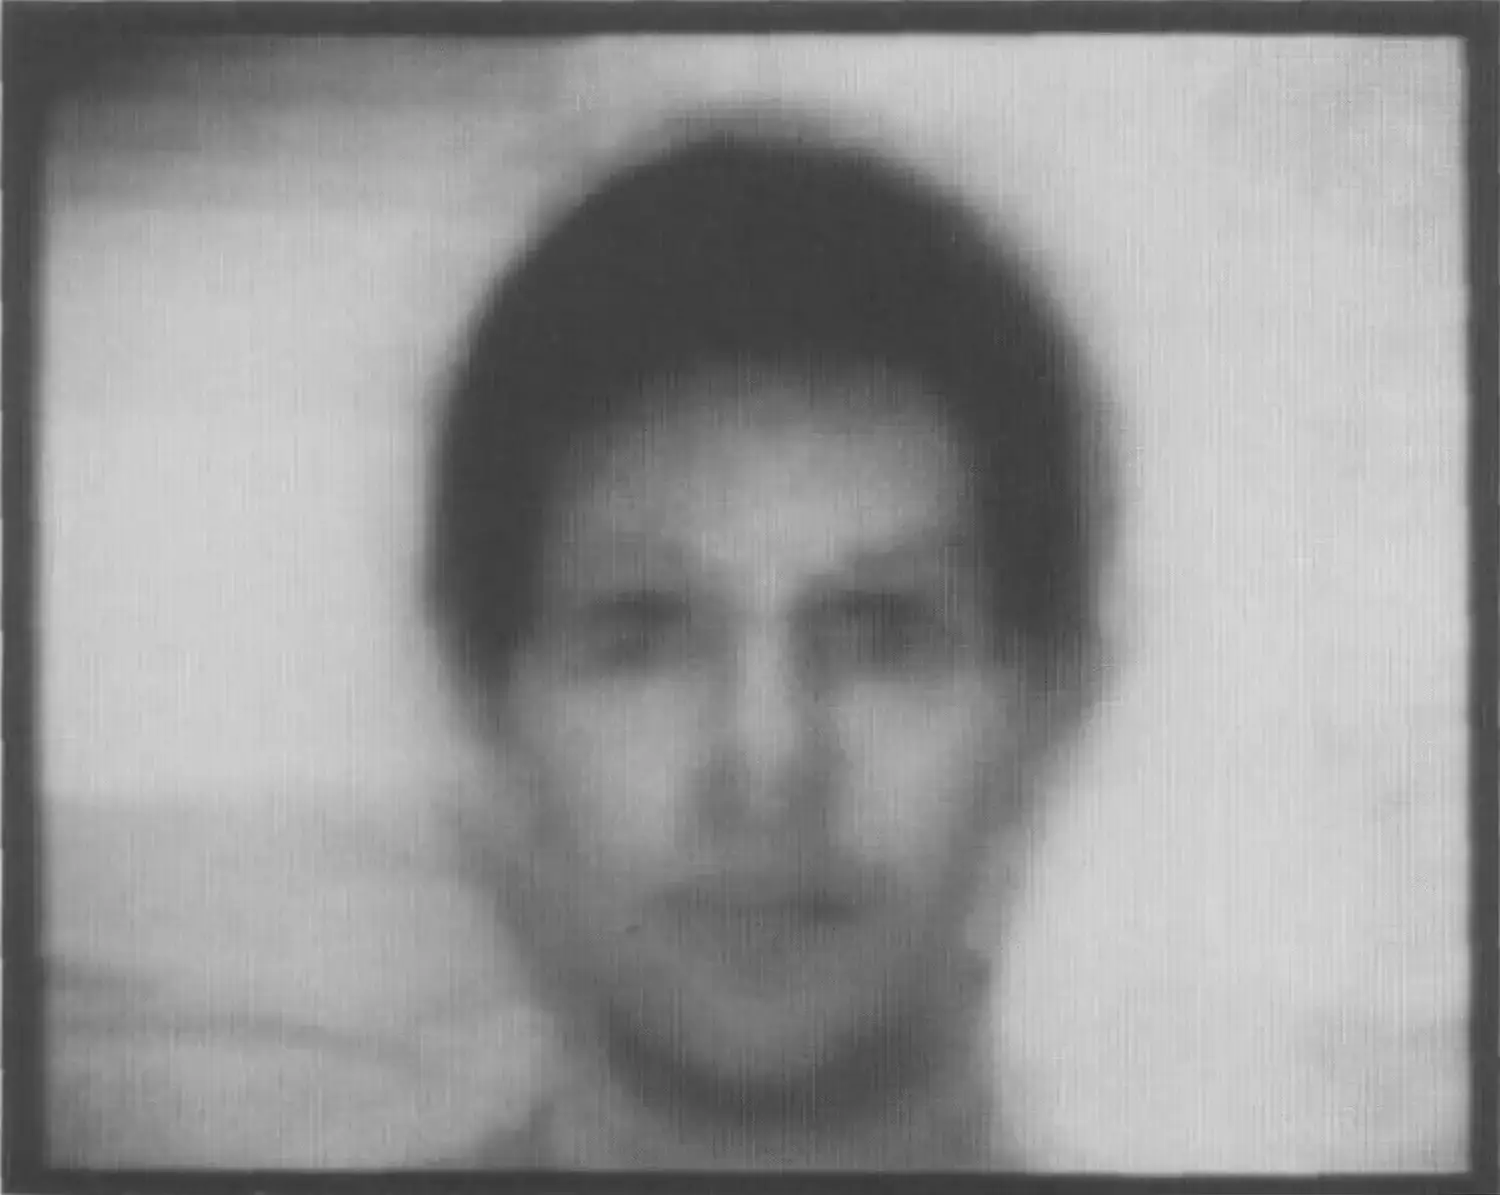 A greyscale image of that depicts a hazy male face with short, dark hair. 